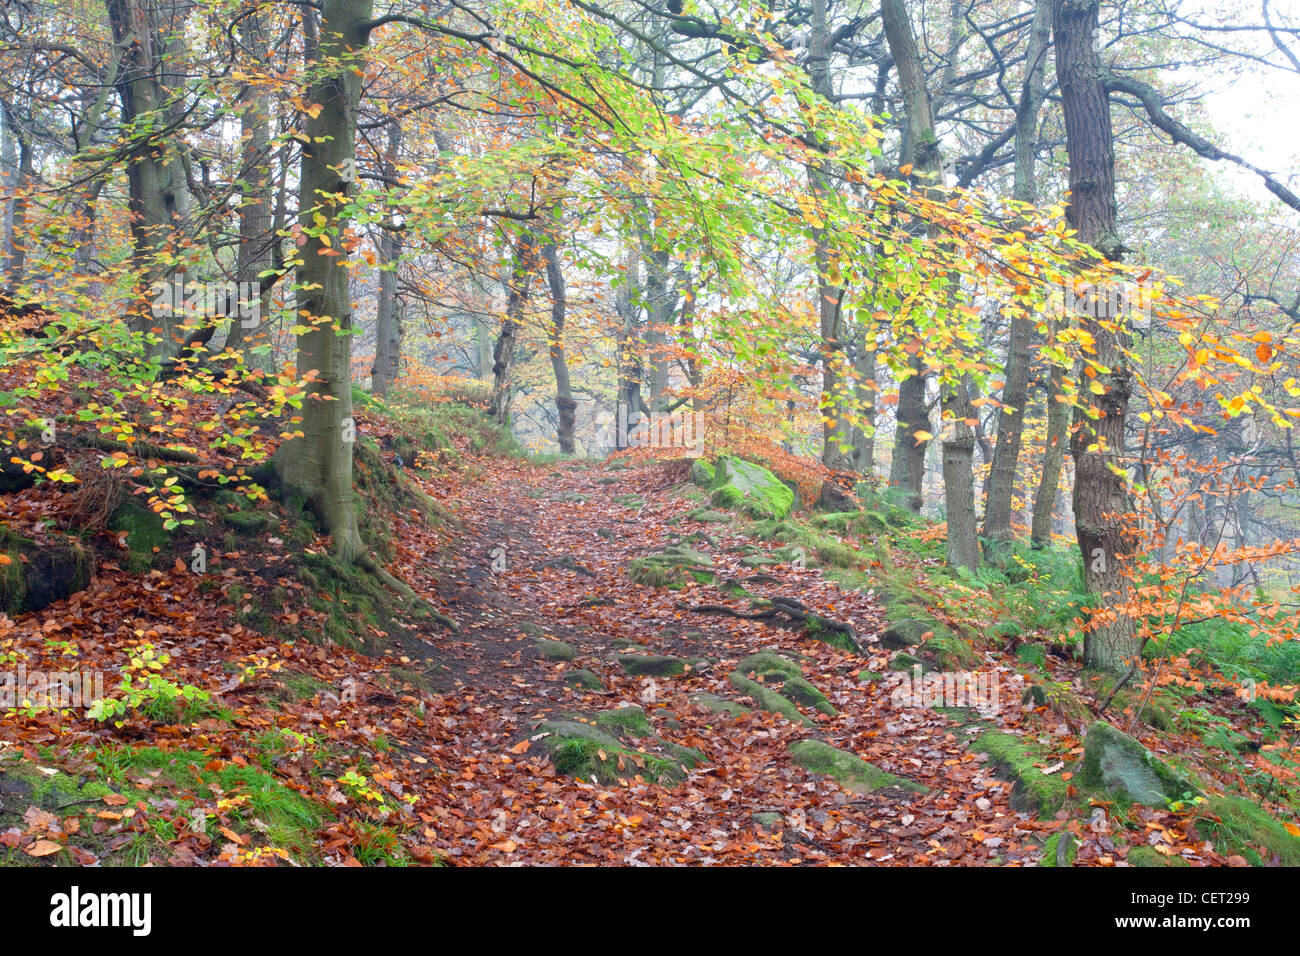 Padley Gorge in the Autumn, one of the finest remaining examples of oak and birch woodland that once covered many Dark Peak vall Stock Photo